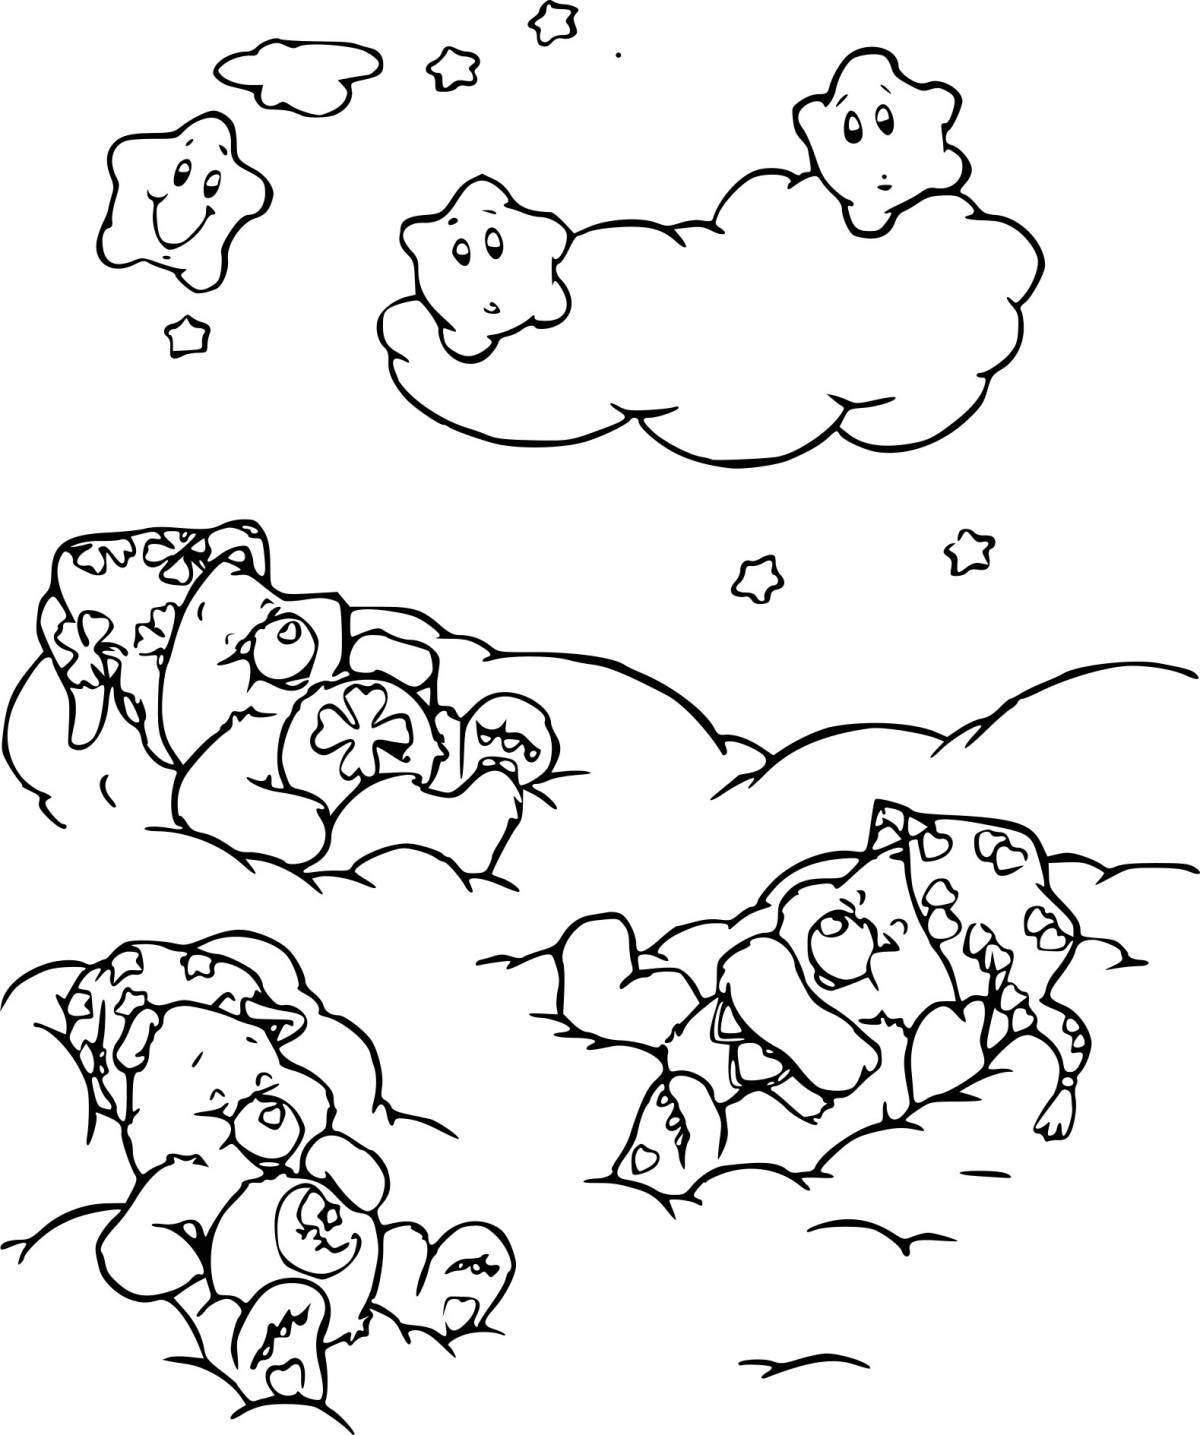 Magic grizzly and lemmings coloring page